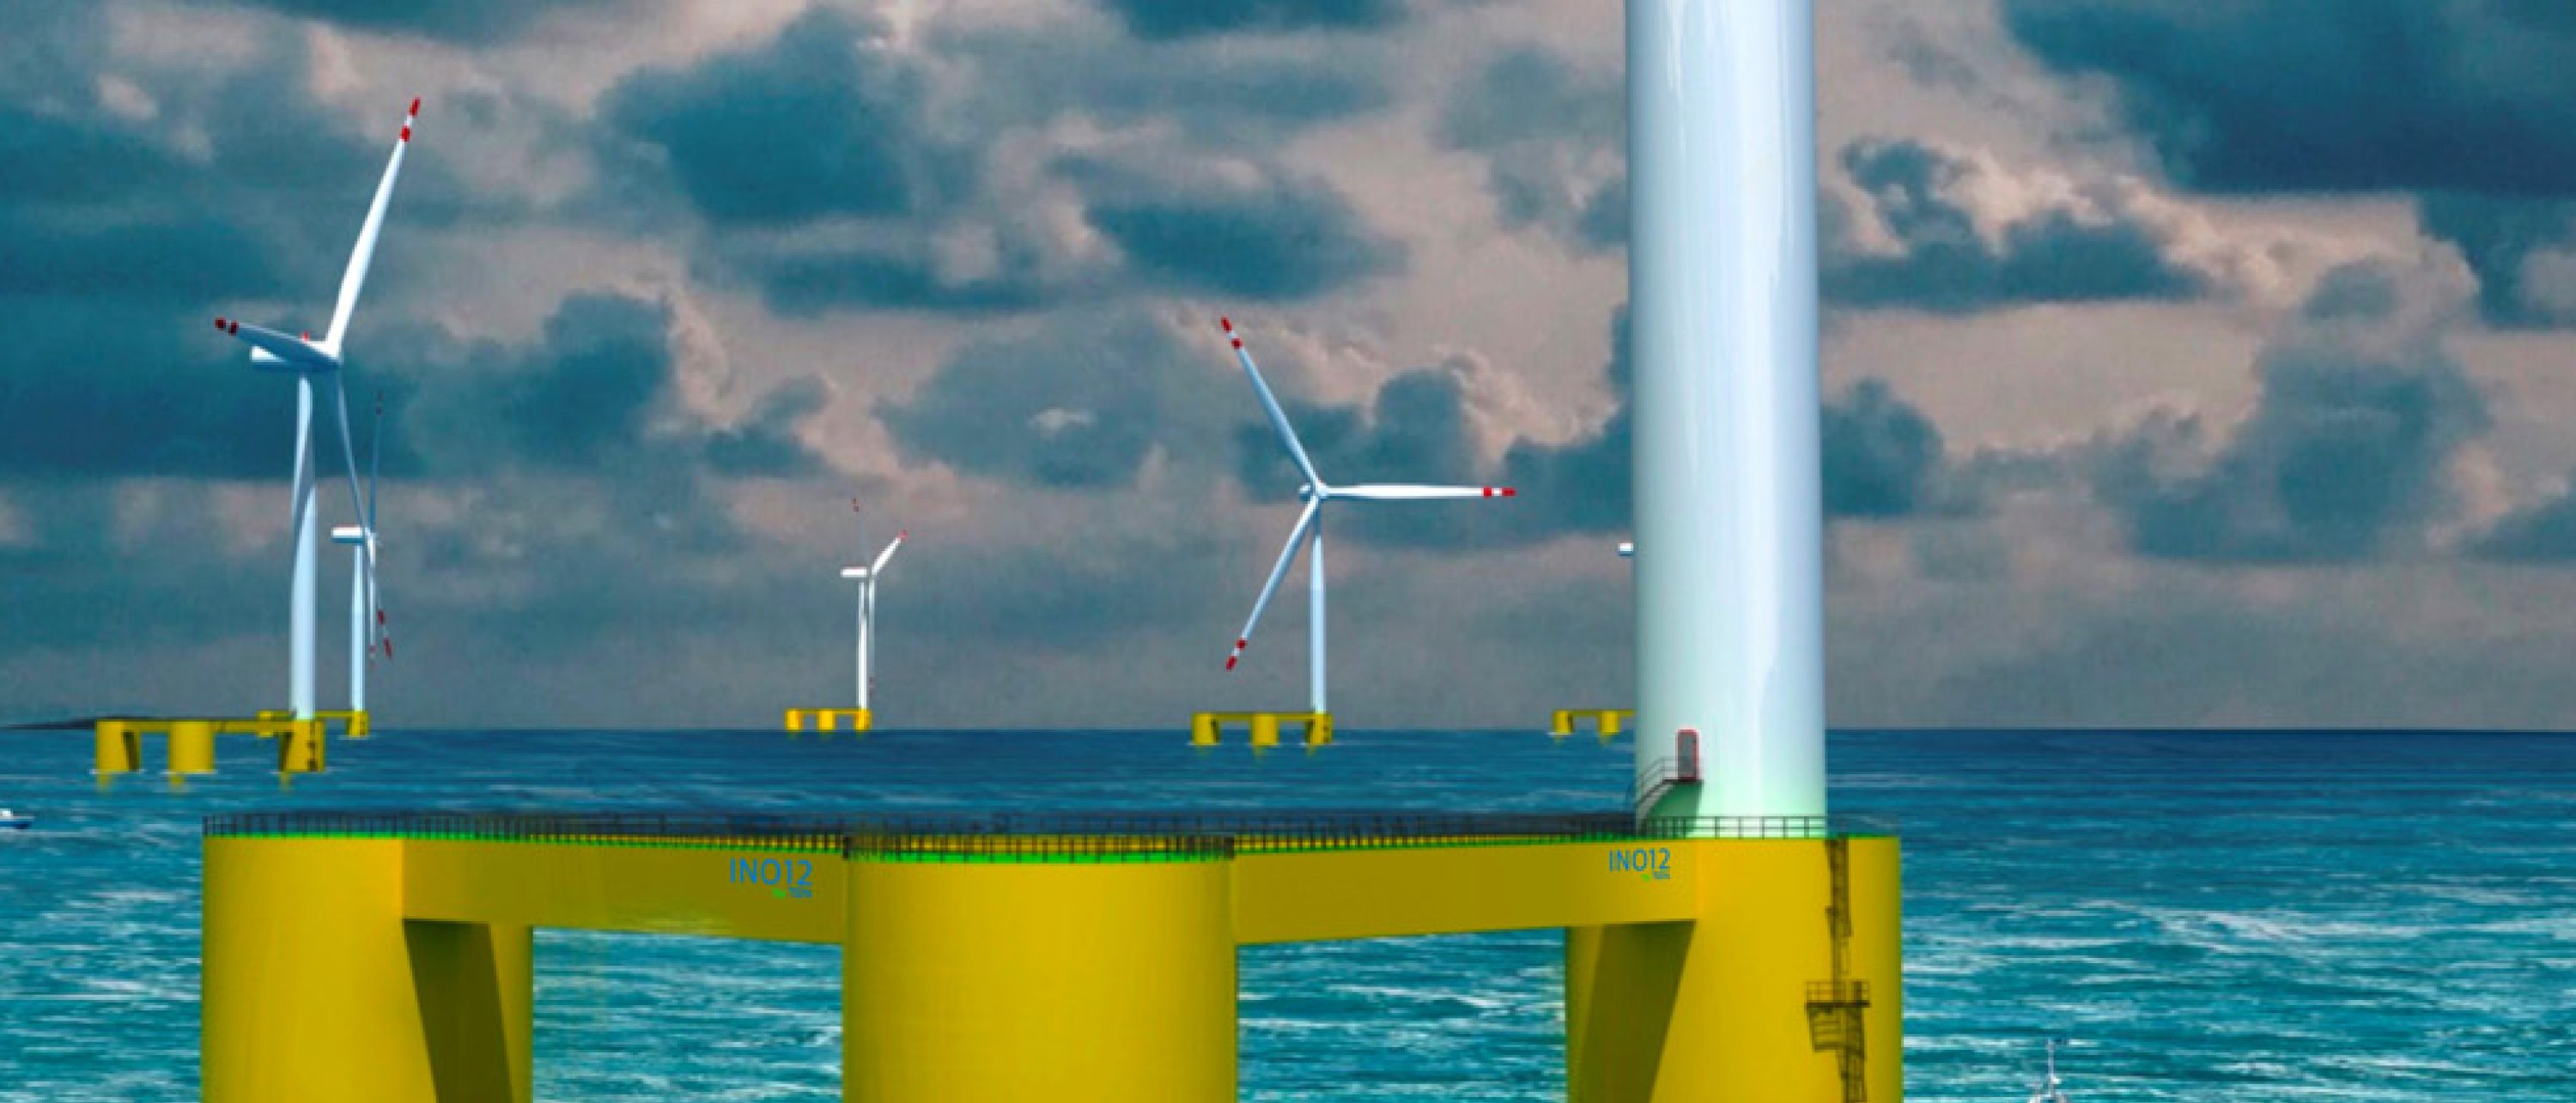 INO12 floating offshore wind banner image